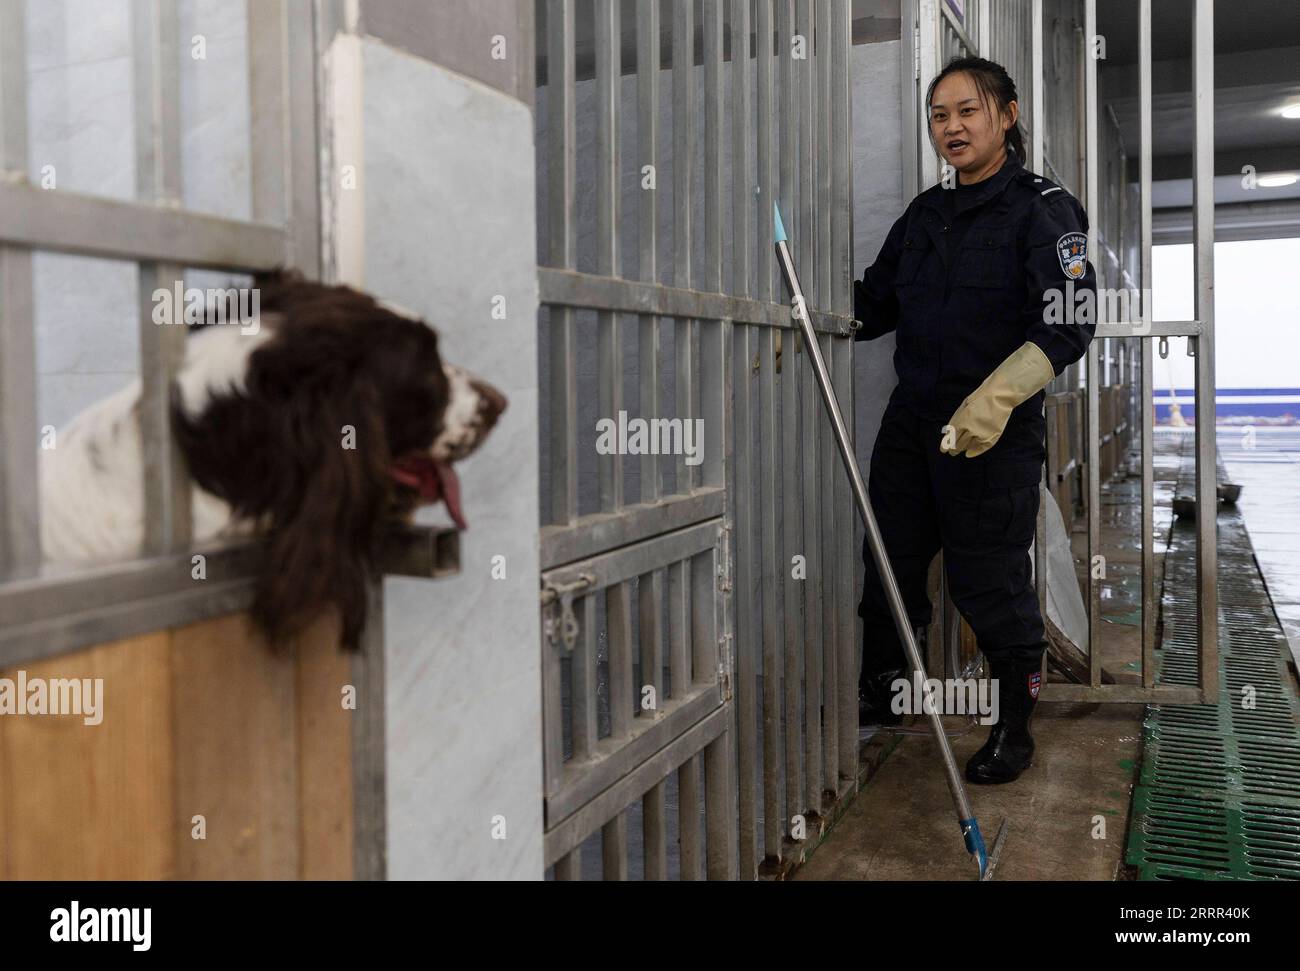 230501 -- ALATAW PASS, May 1, 2023 -- Liu Xin cleans the kennel for police dog Kang Xin at Alataw Pass, northwest China s Xinjiang Uygur Autonomous Region, April 3, 2023. Alataw Pass is a major land port at the China-Kazakhstan border in northwest China s Xinjiang Uygur Autonomous Region. Cui Hongwu, an official with the border inspection station at the port, has been working for over 10 years. Here he met his wife Liu Xin, who is his colleague and works as a police dog handler. In recent years, the Alataw Pass has seen a growing number and accelerating frequency of inbound and outbound train Stock Photo